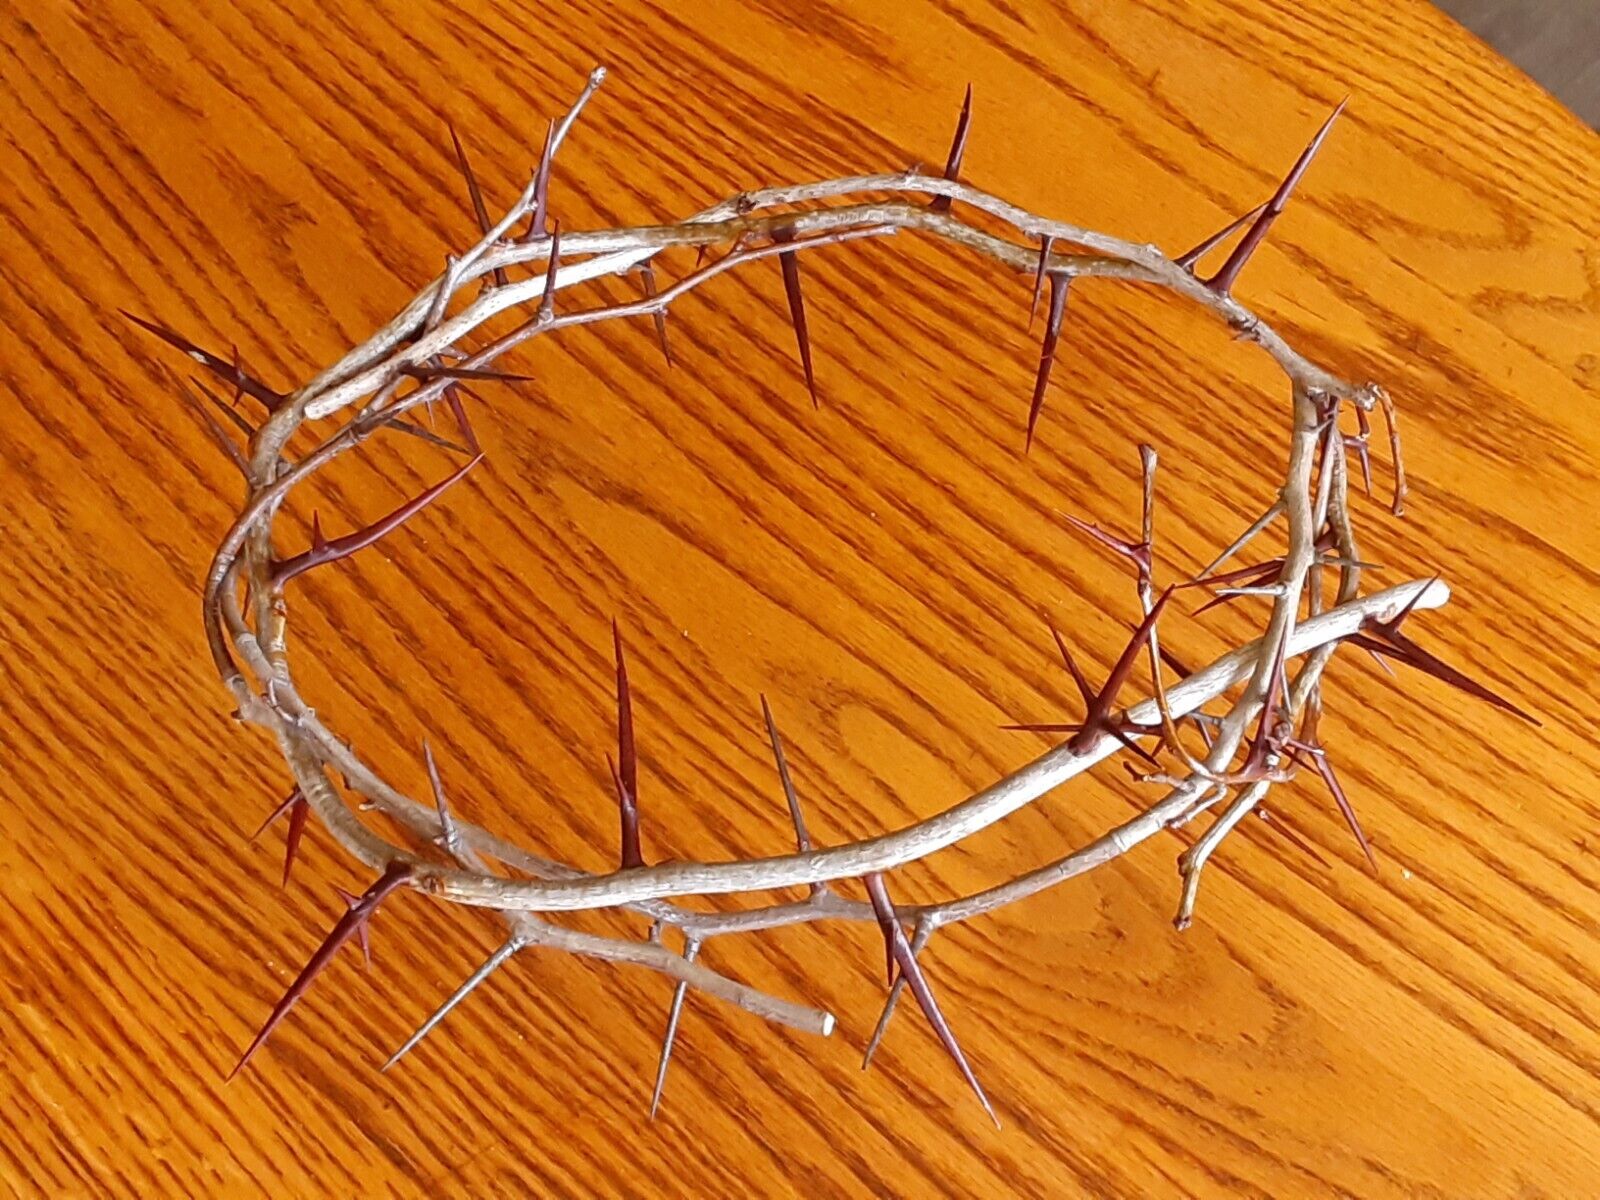 CROWN OF THORNS - HANDMADE - Jesus, Lent, Good Friday, Passiontide